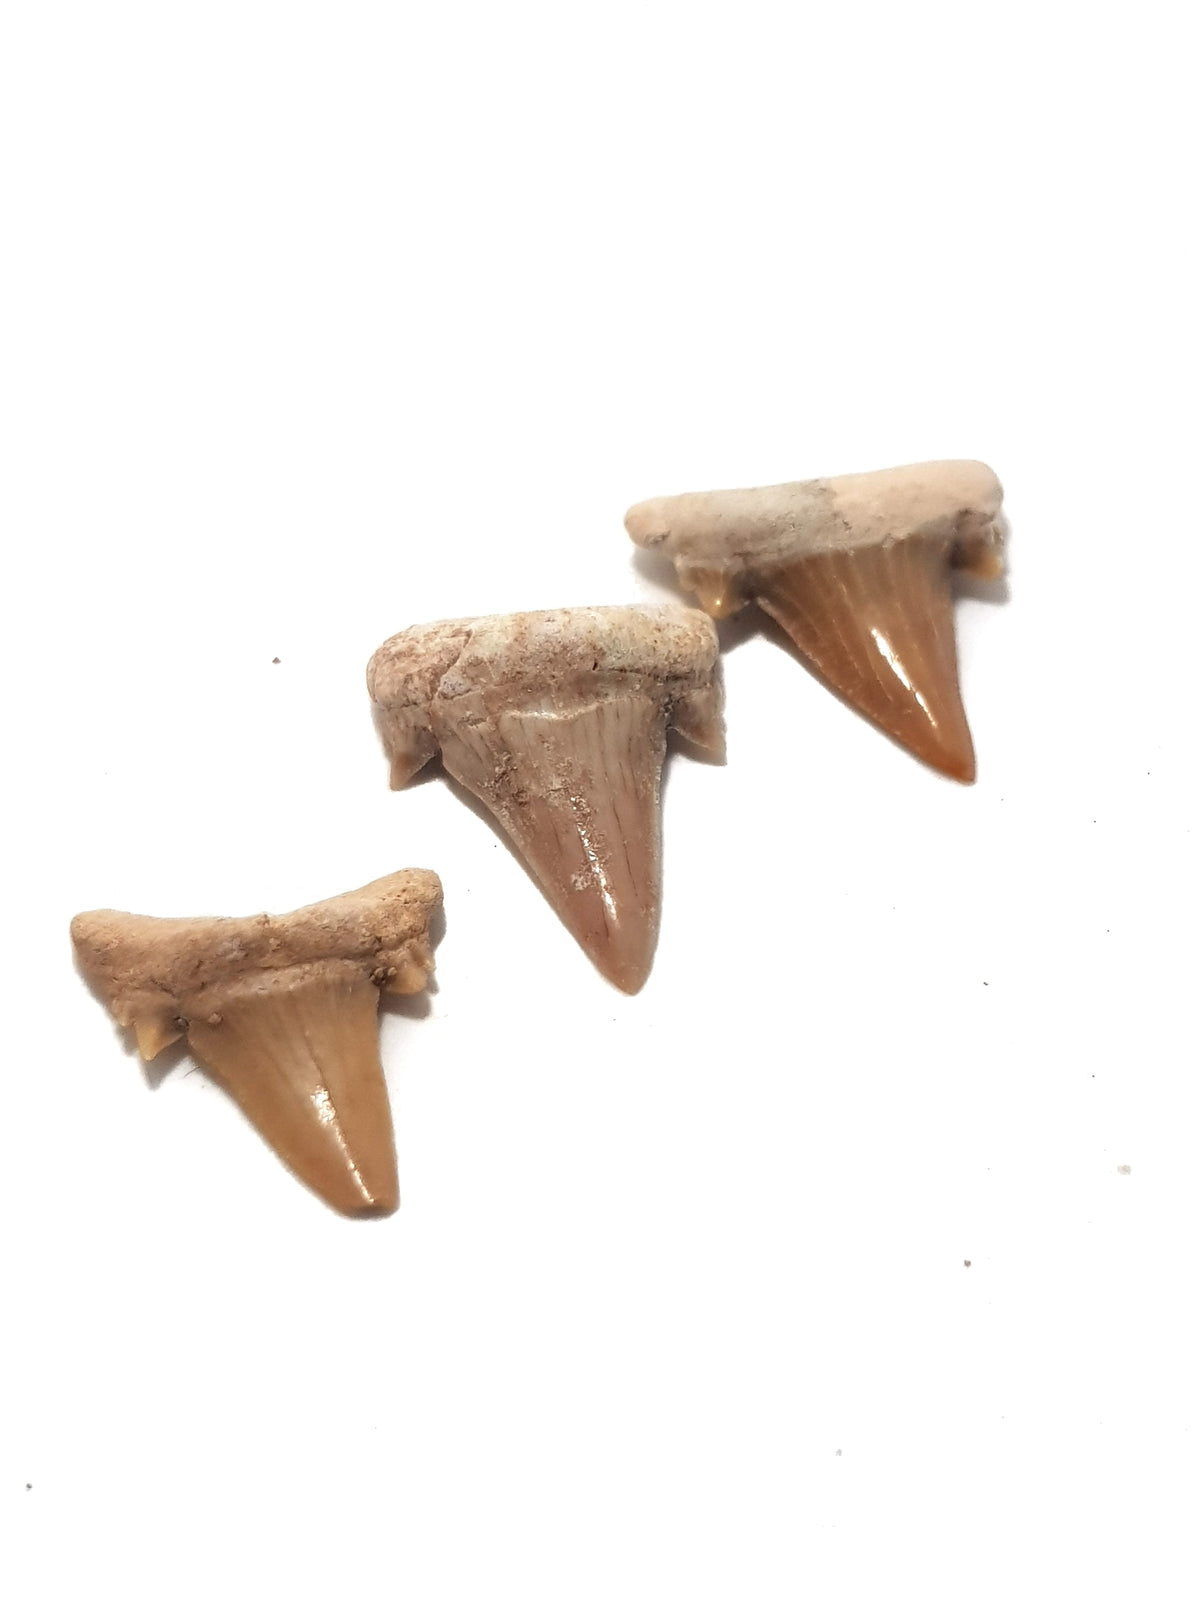 three otodus shark teeth. the cuspicles are obvious and intact.